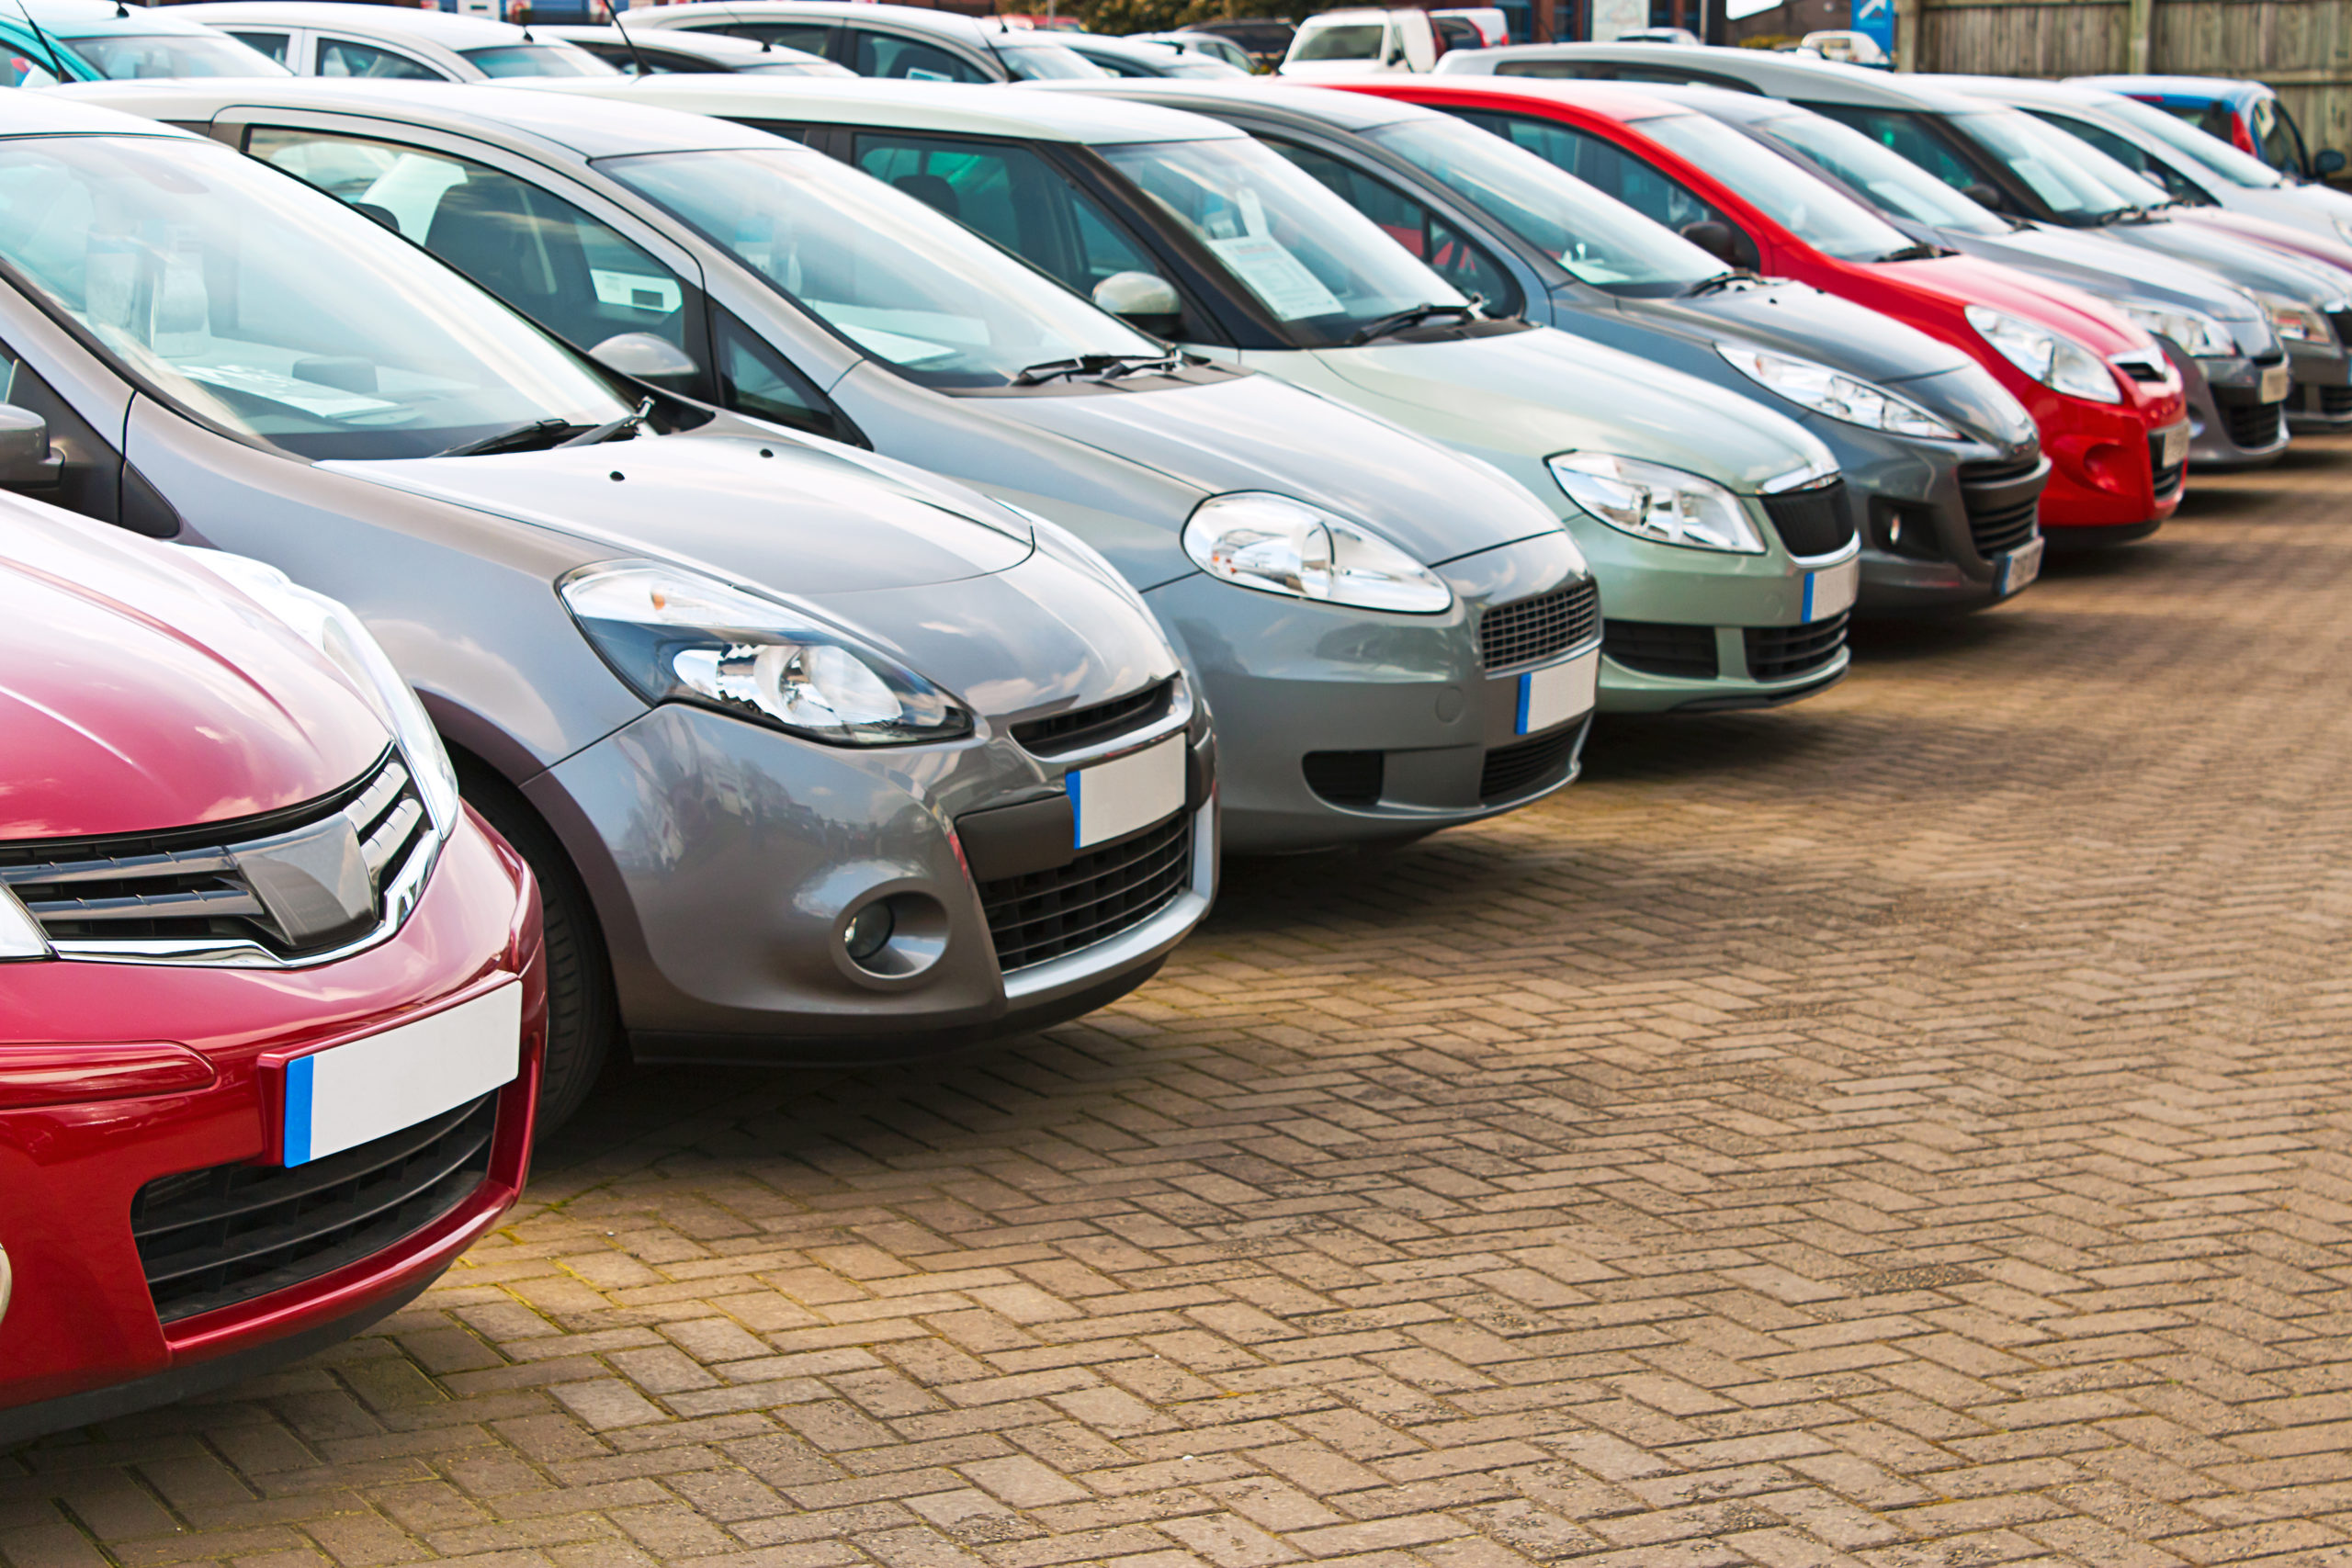 Vehicle Trade-In Values on the Rise | THE SHOP